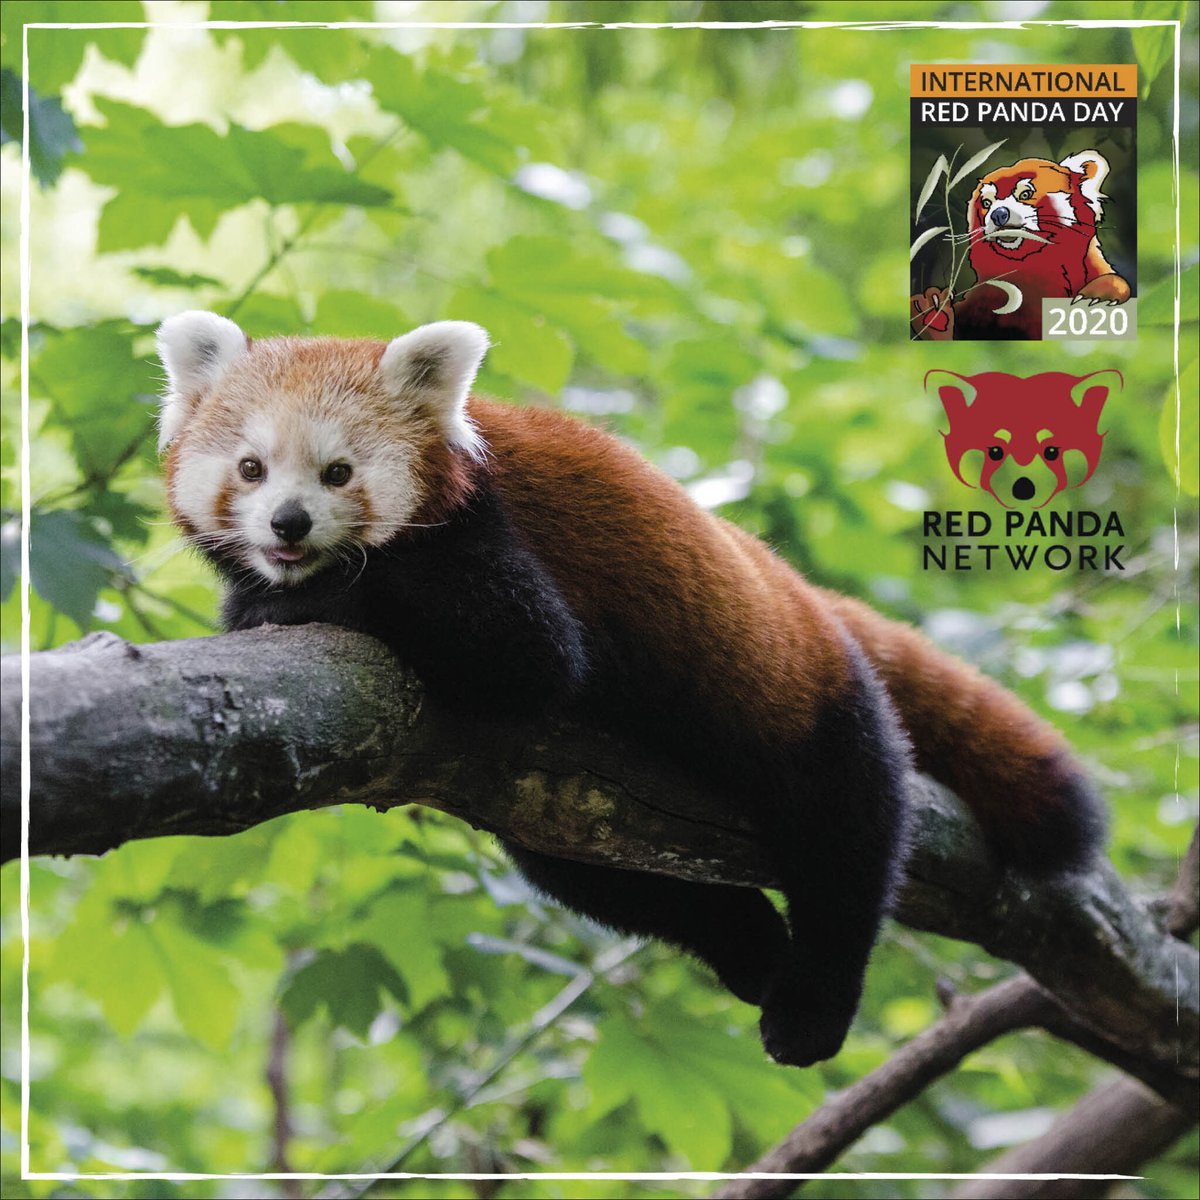 Small things can make a big impact!

Help @RedPandaNetwork restore red panda habitats in #Nepal by creating a wildlife corridor in the #Himalayas with #PlantAHome's goal of 50,000 trees for them & join us to #SaveTheRedPanda! 🐾

givebutter.com/IRPD2020/crist…

#IRPD2020 via @givebutter